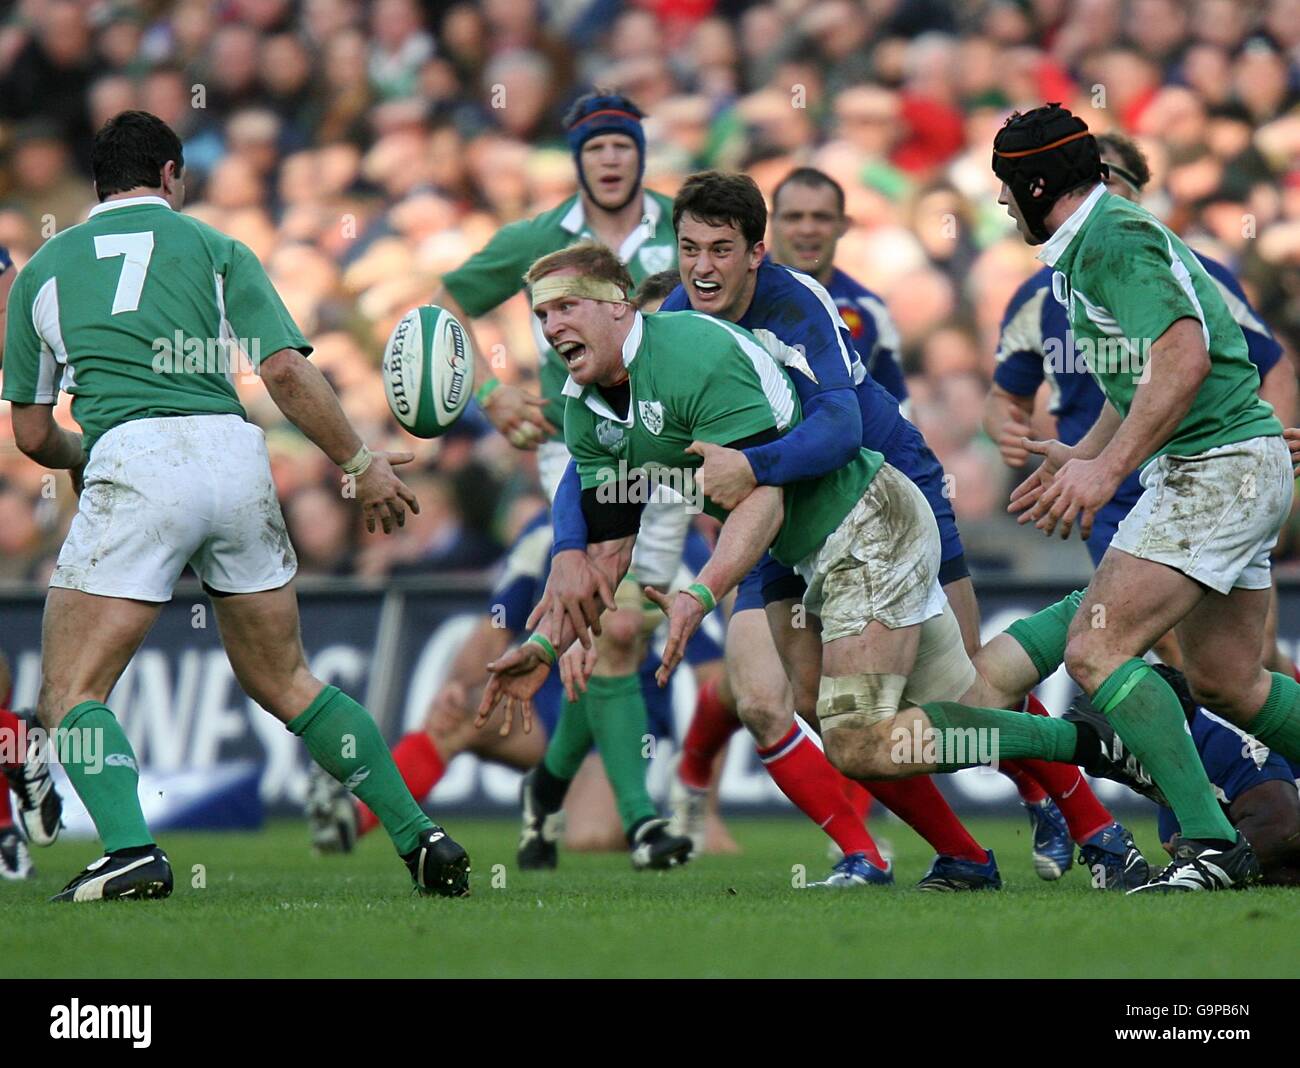 Rugby Union - RBS 6 Nations Championship 2007 - Ireland v France - Croke Park Stadium. Ireland's Paul O'Connell manages to offload the ball under pressure Stock Photo